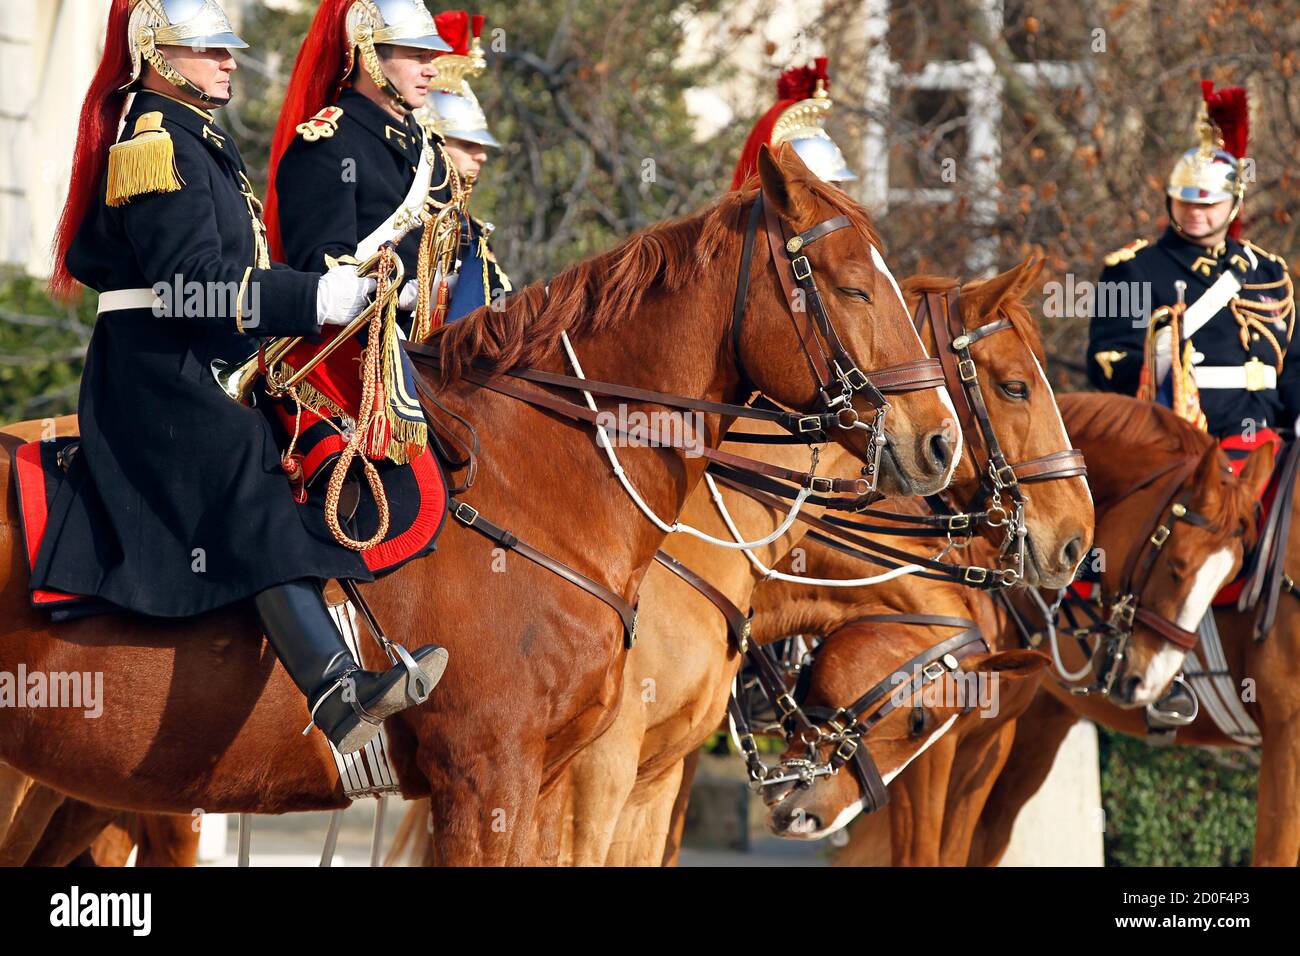 French mounted Republican Guard waits for the arrival of South African  President Jacob Zuma at the National Assembly in Paris March 3, 2011.  REUTERS/Charles Platiau (FRANCE - Tags: POLITICS ANIMALS MILITARY Stock